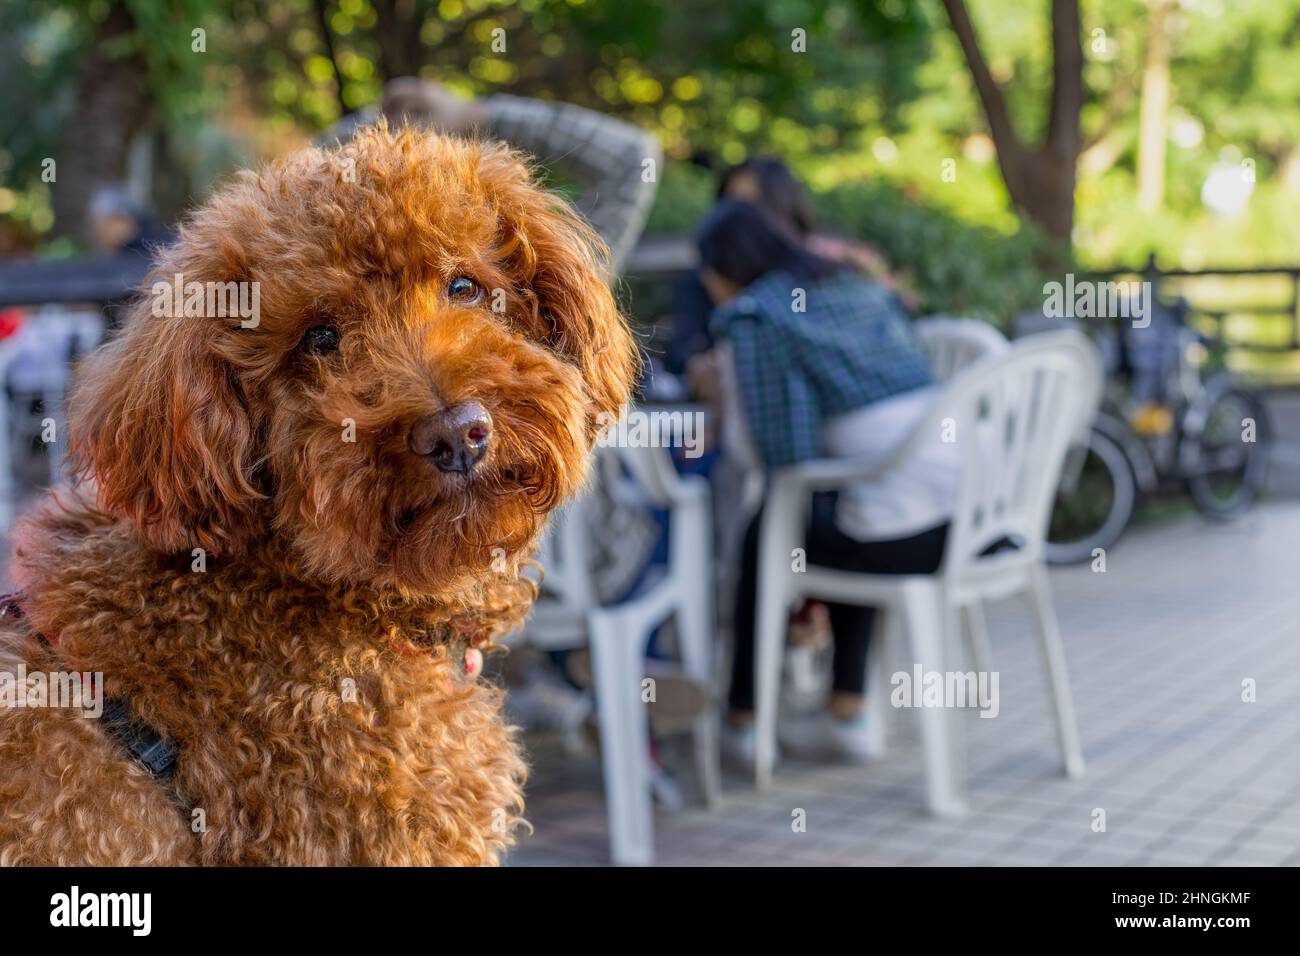 Portrait of brown poodle with tilted head looking straight at camera at an outdoor cafe. Plenty of copyspace to the right. Stock Photo